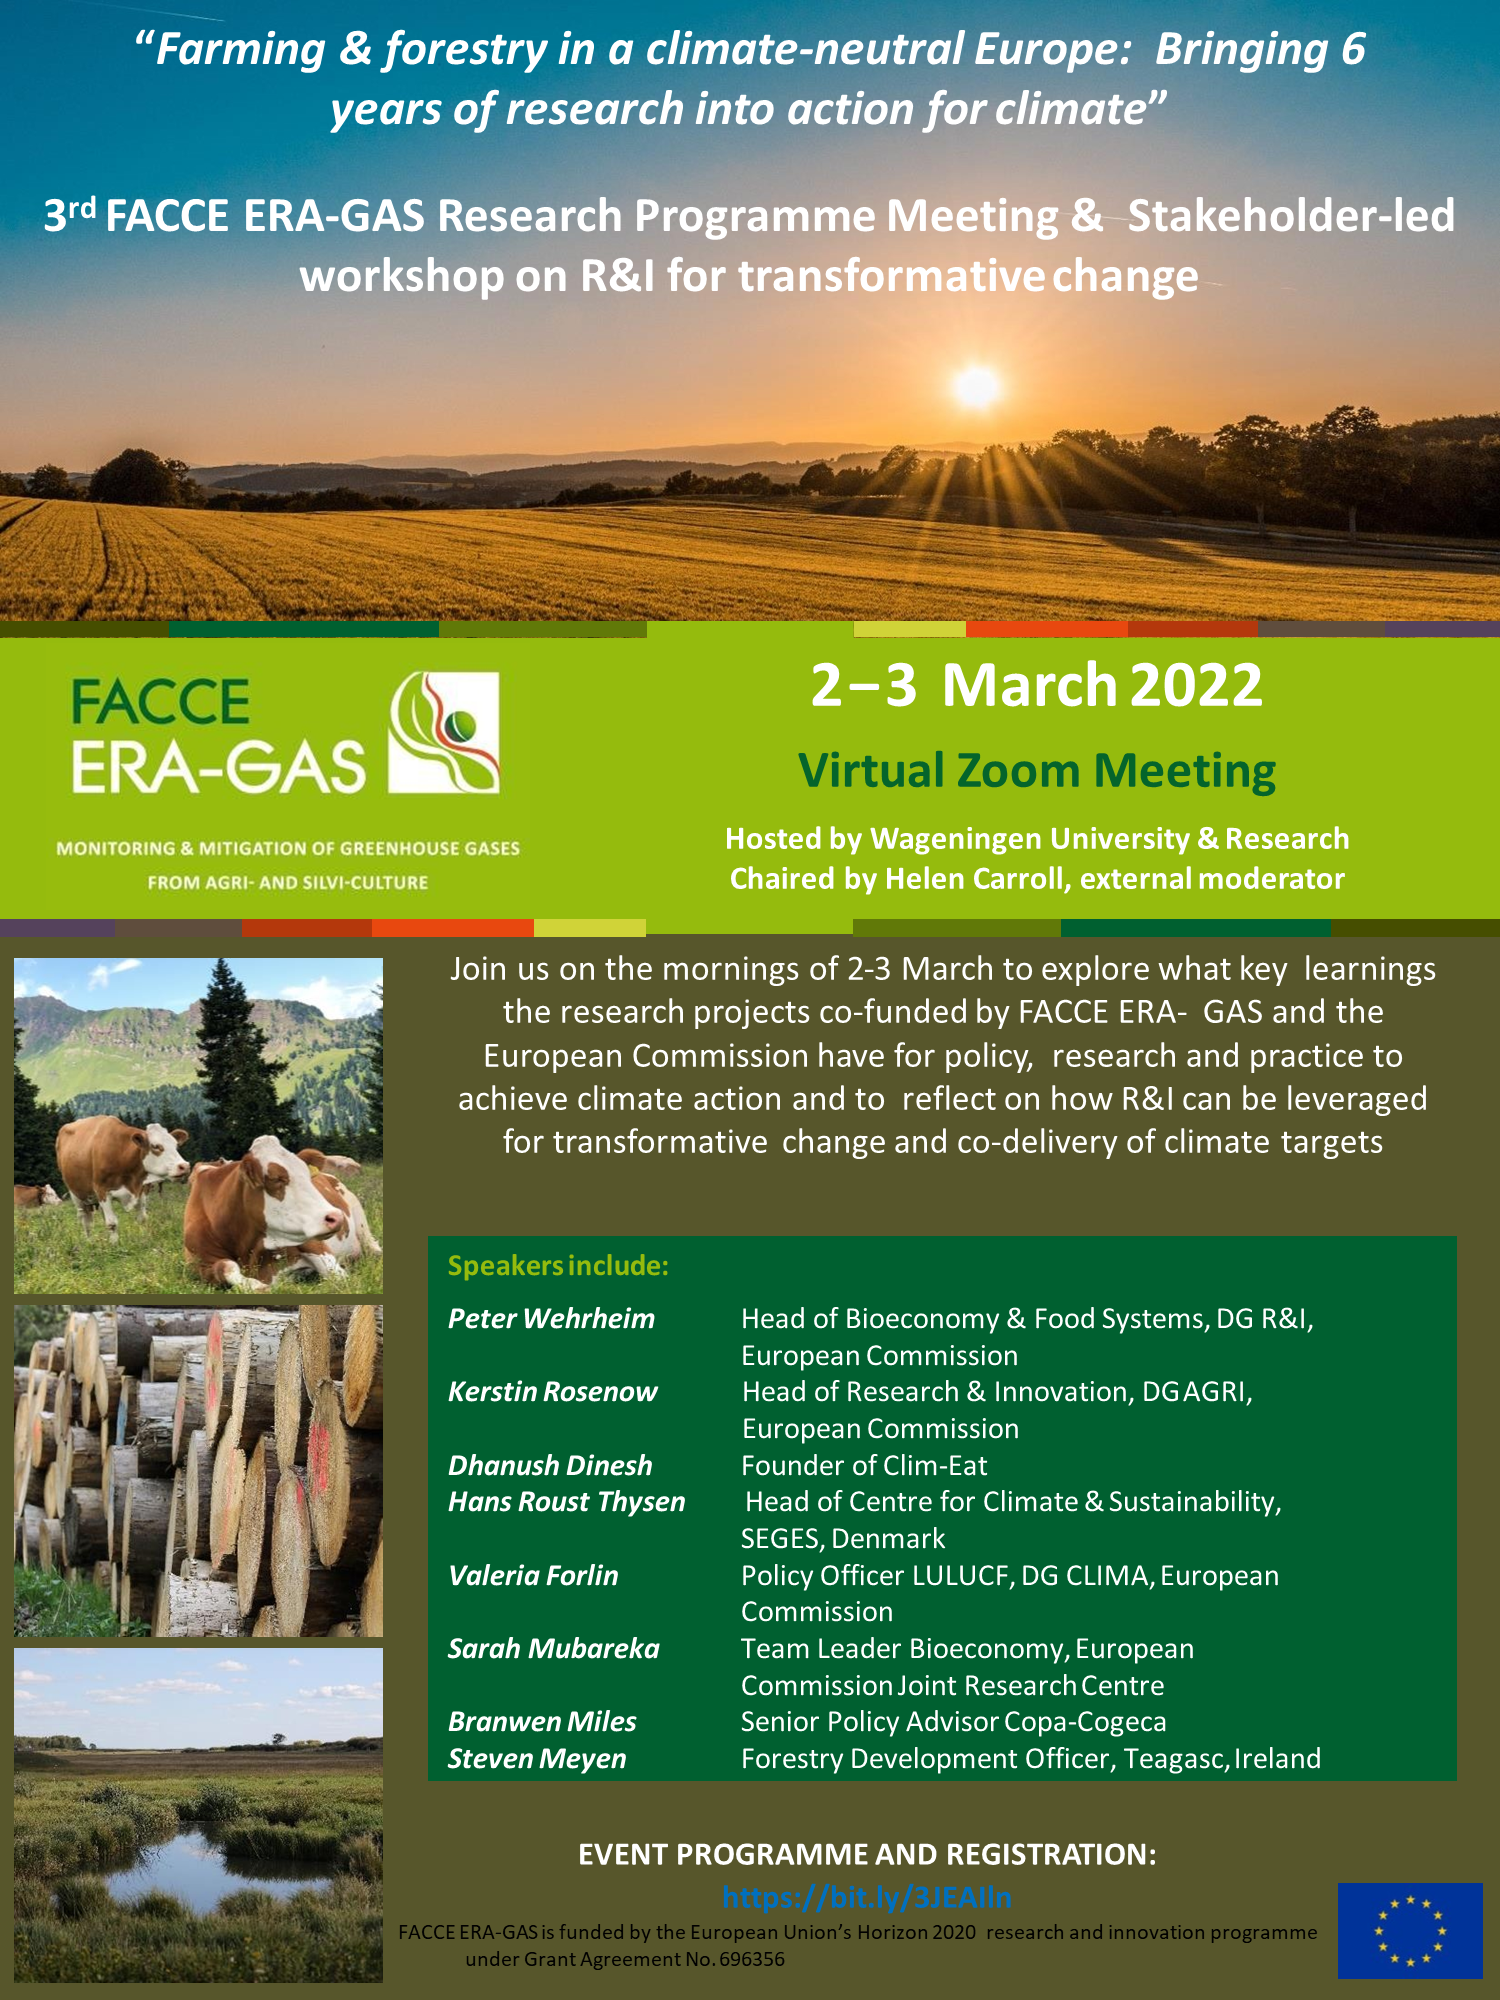 _newFACCE ERA-GAS 3rd RPM & Stakeholder-led Workshop_INVITATION-converted.png